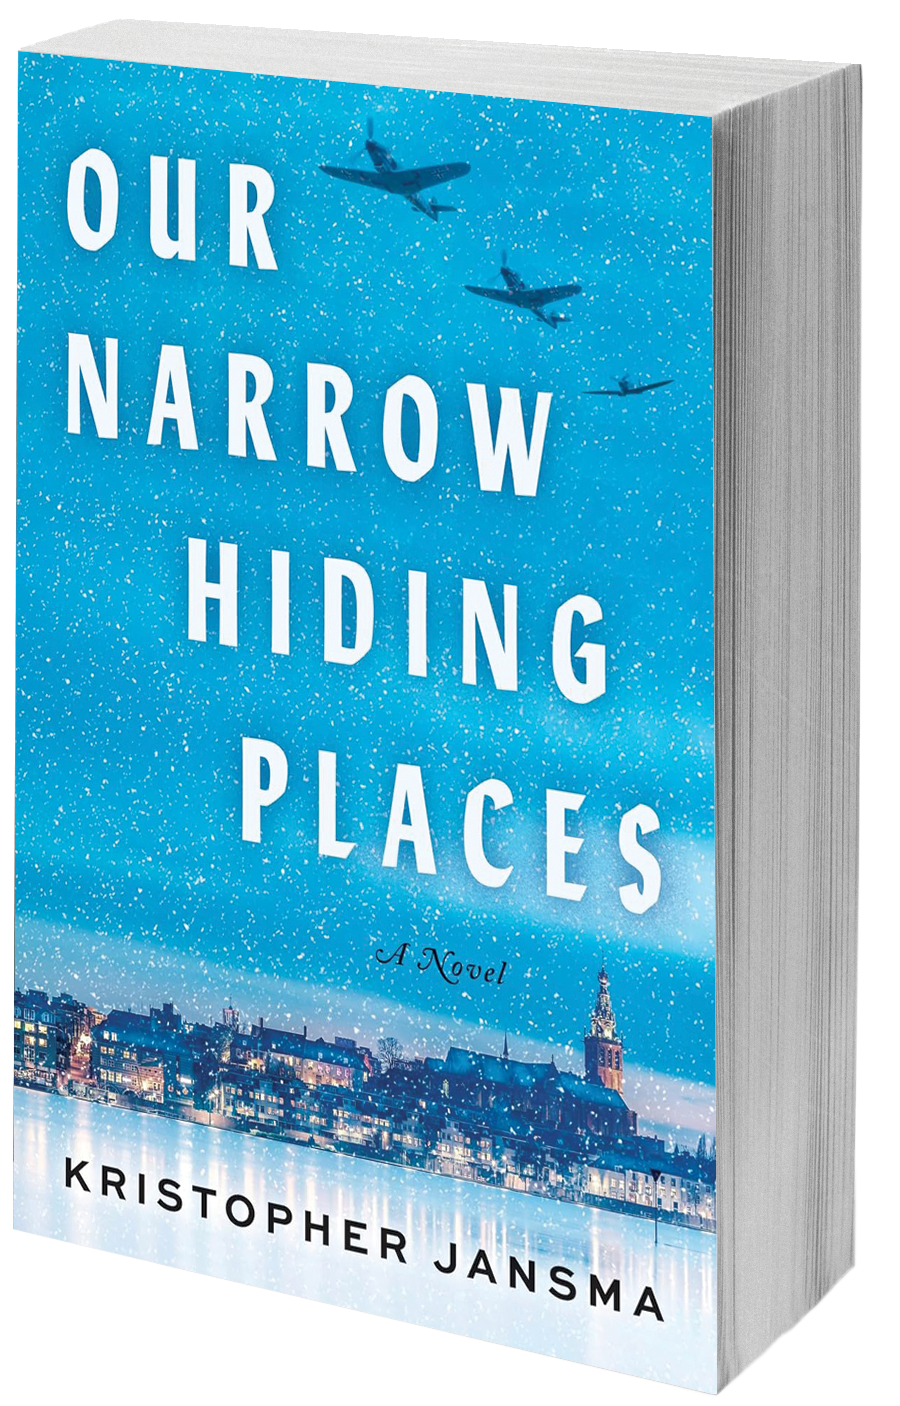 book cover planes flyign over a city at night